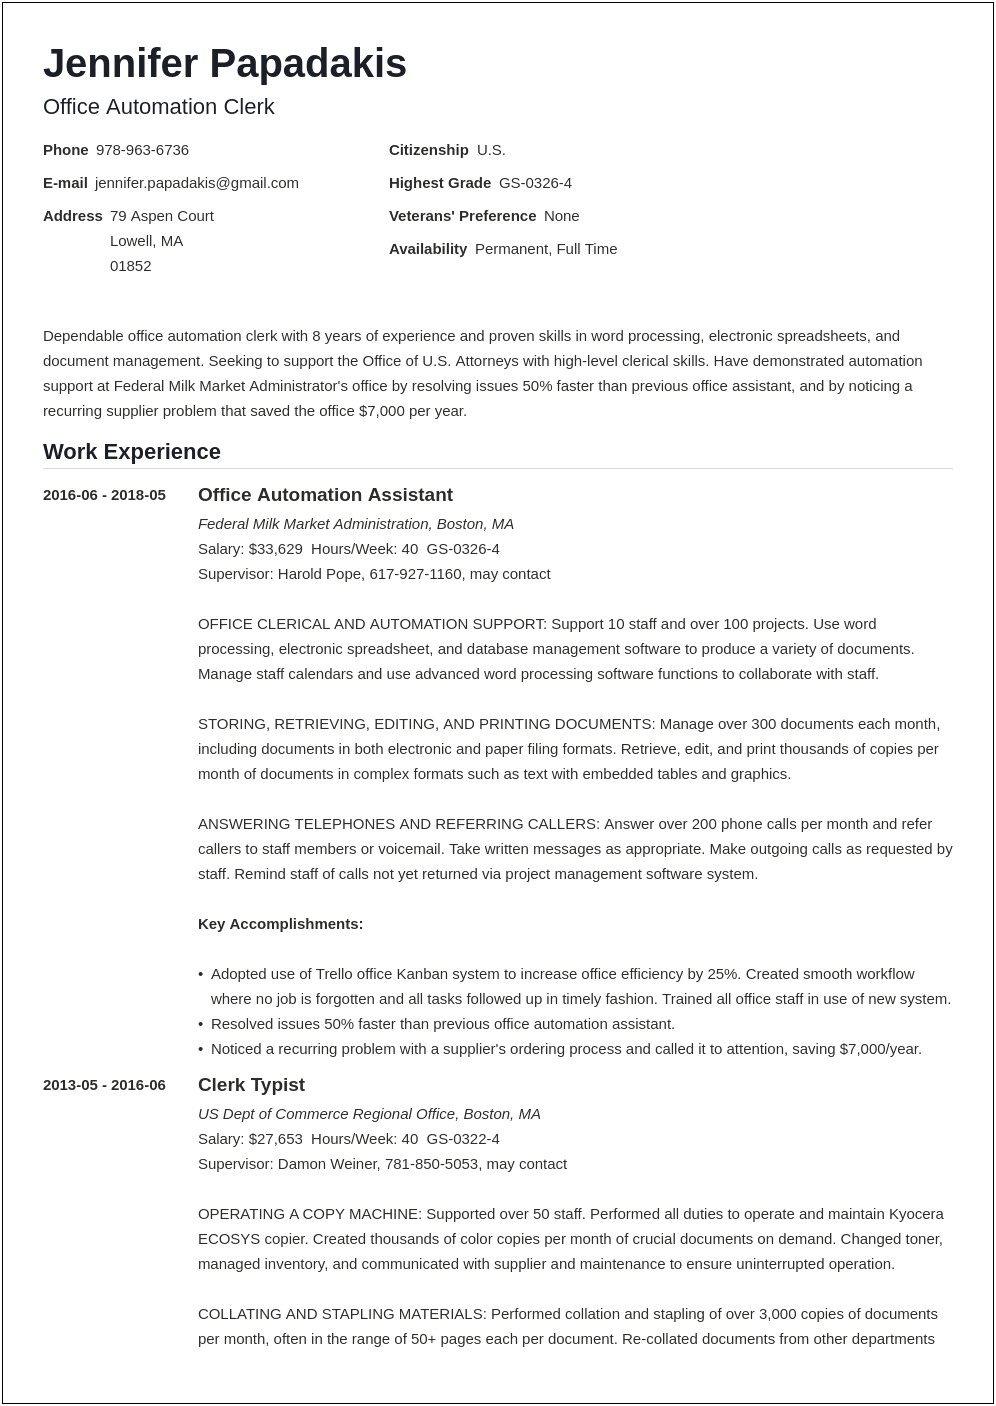 Example Resume For Federal Employment